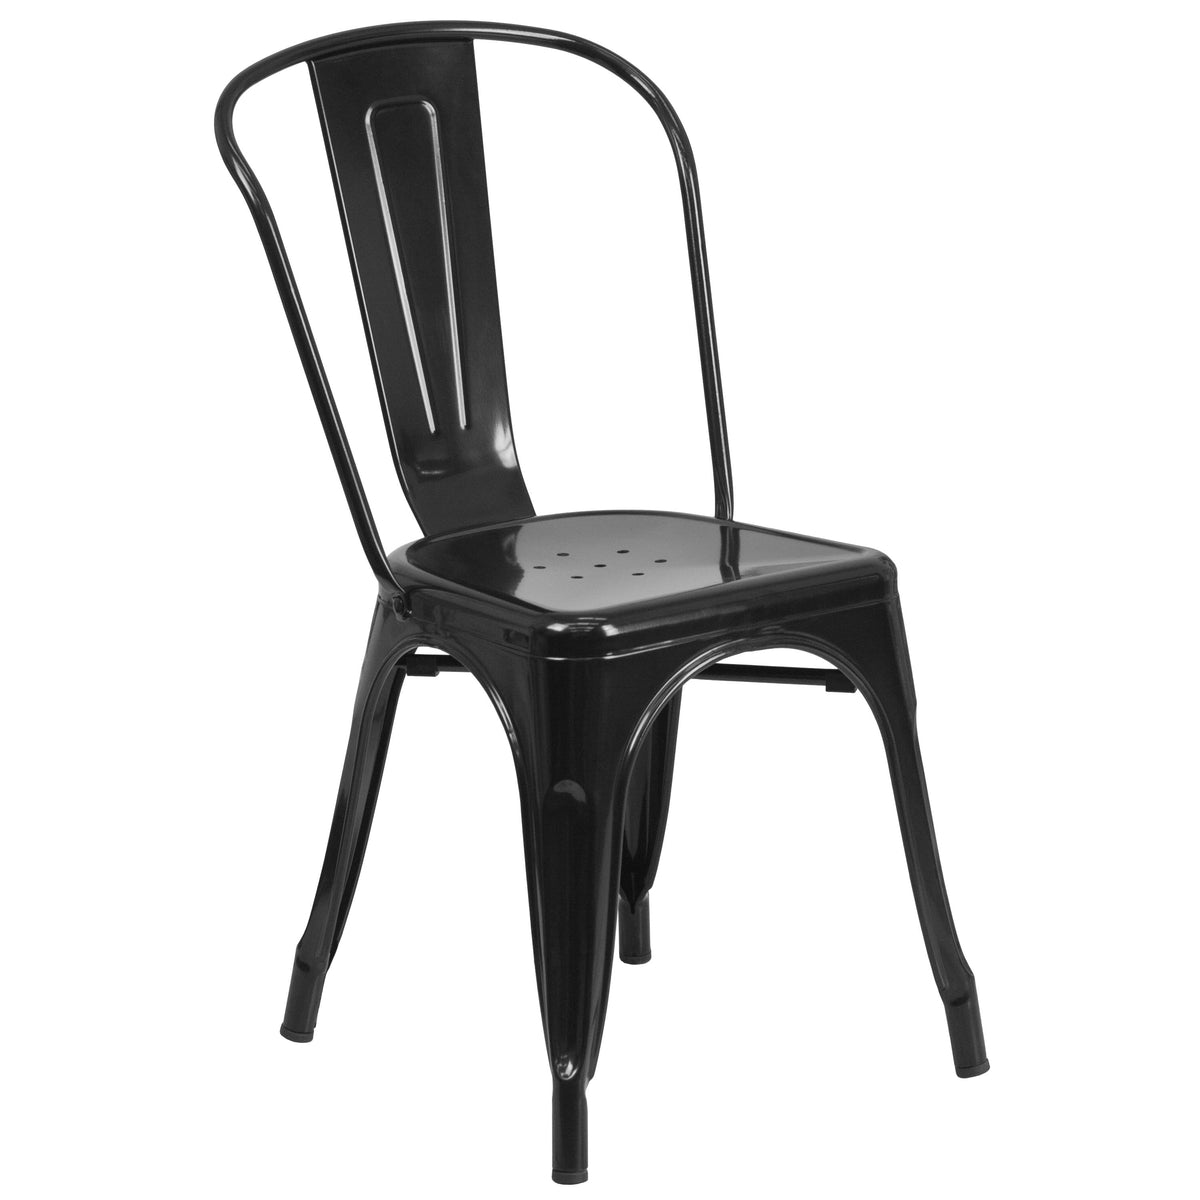 Black |#| 24inch Round Black Metal Indoor-Outdoor Table Set with 2 Cafe Chairs - Patio Set